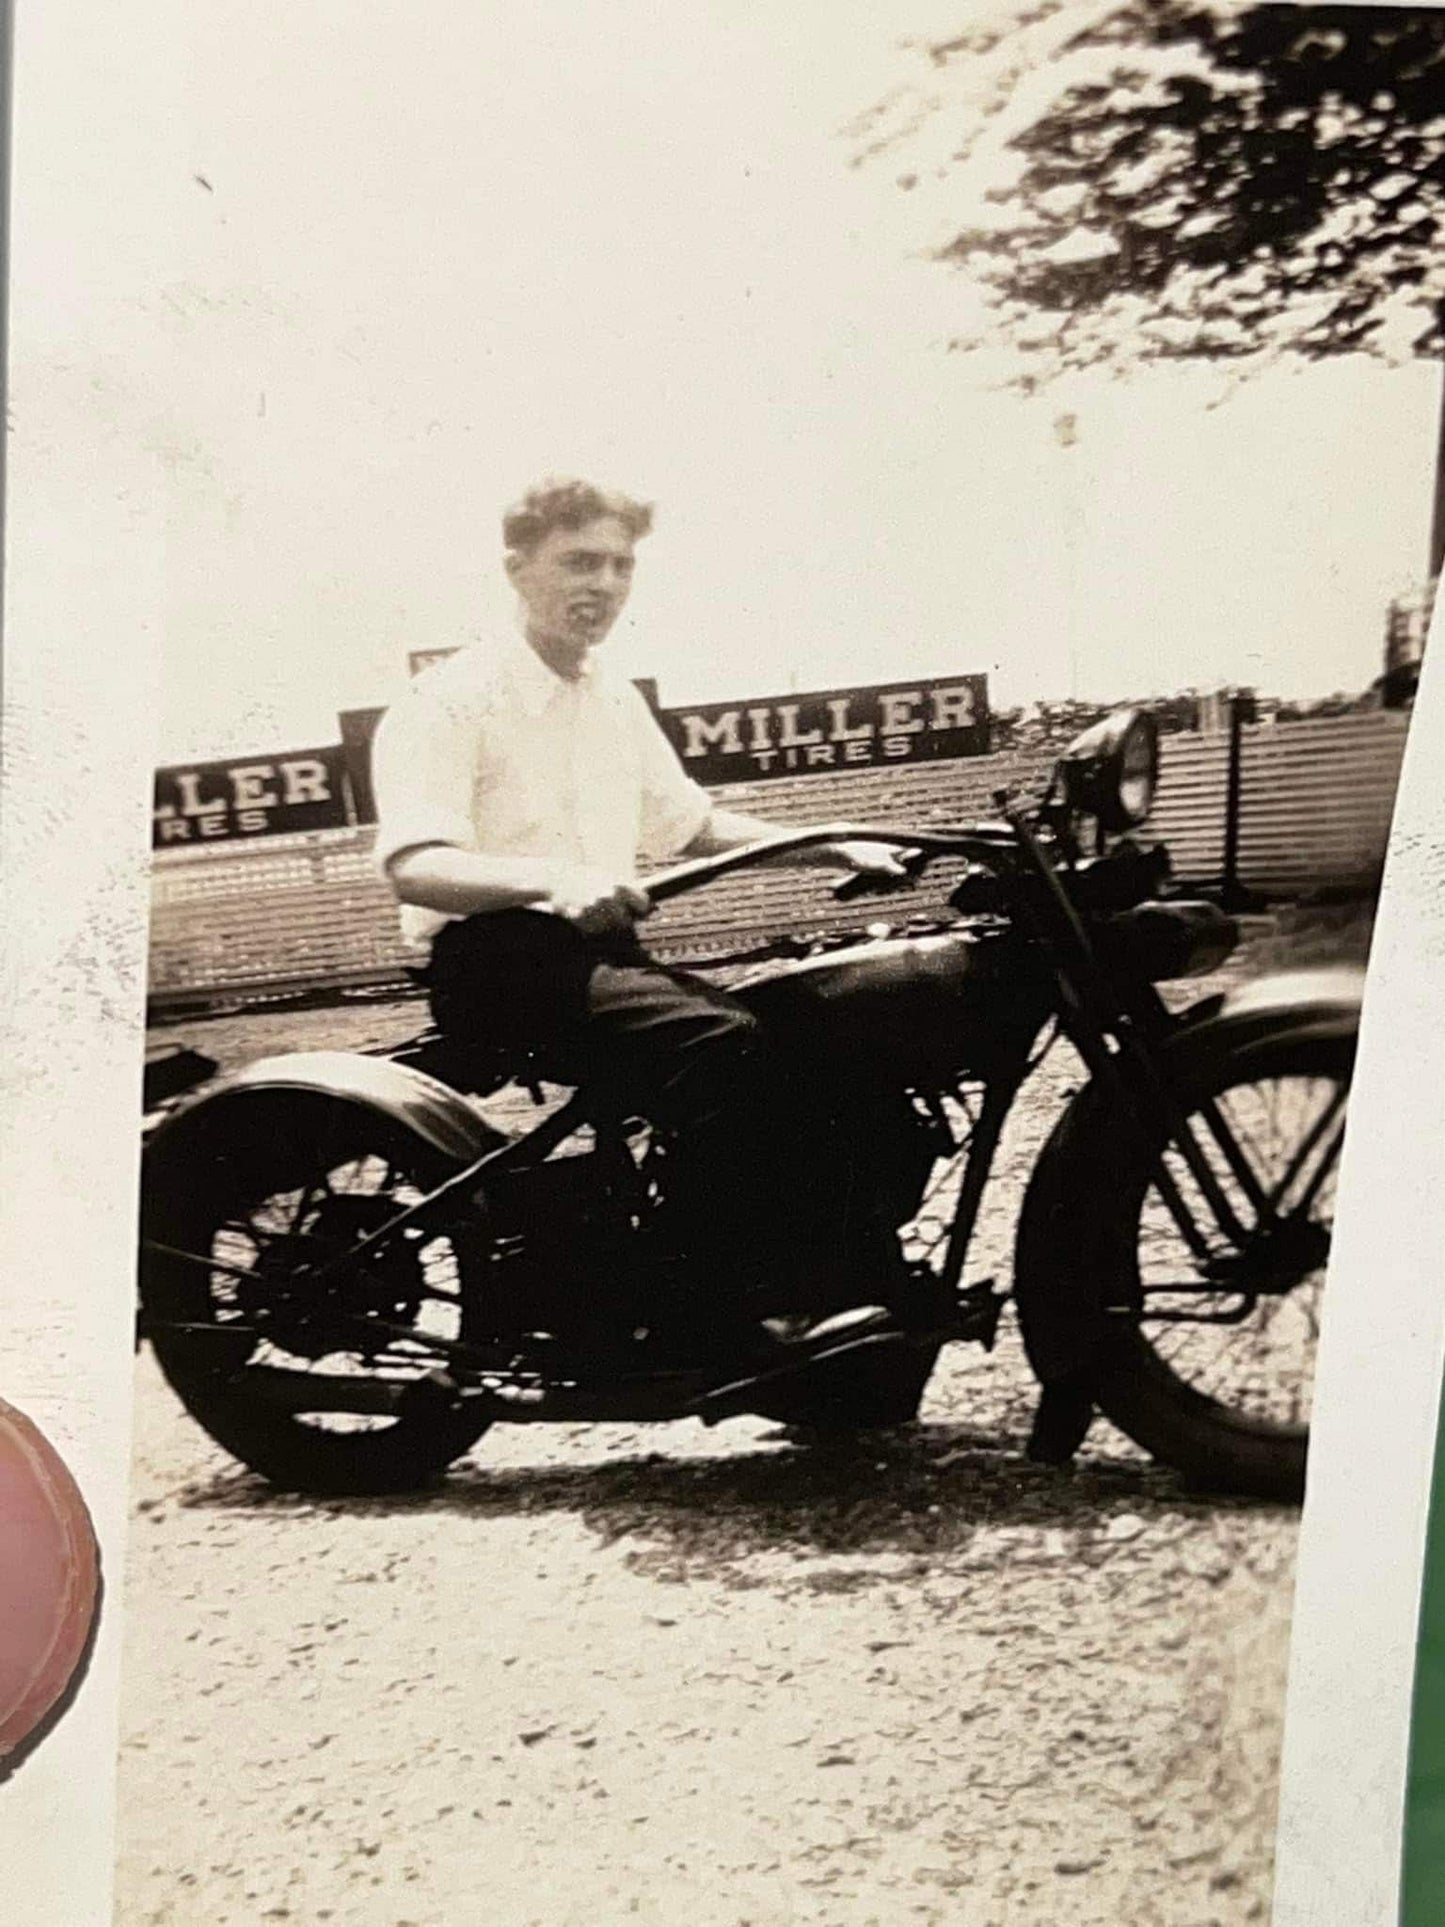 Vintage photography 1940s snapshot Man on a Harley or Indian appears to have a cigar in mouth Miller tires sign in background